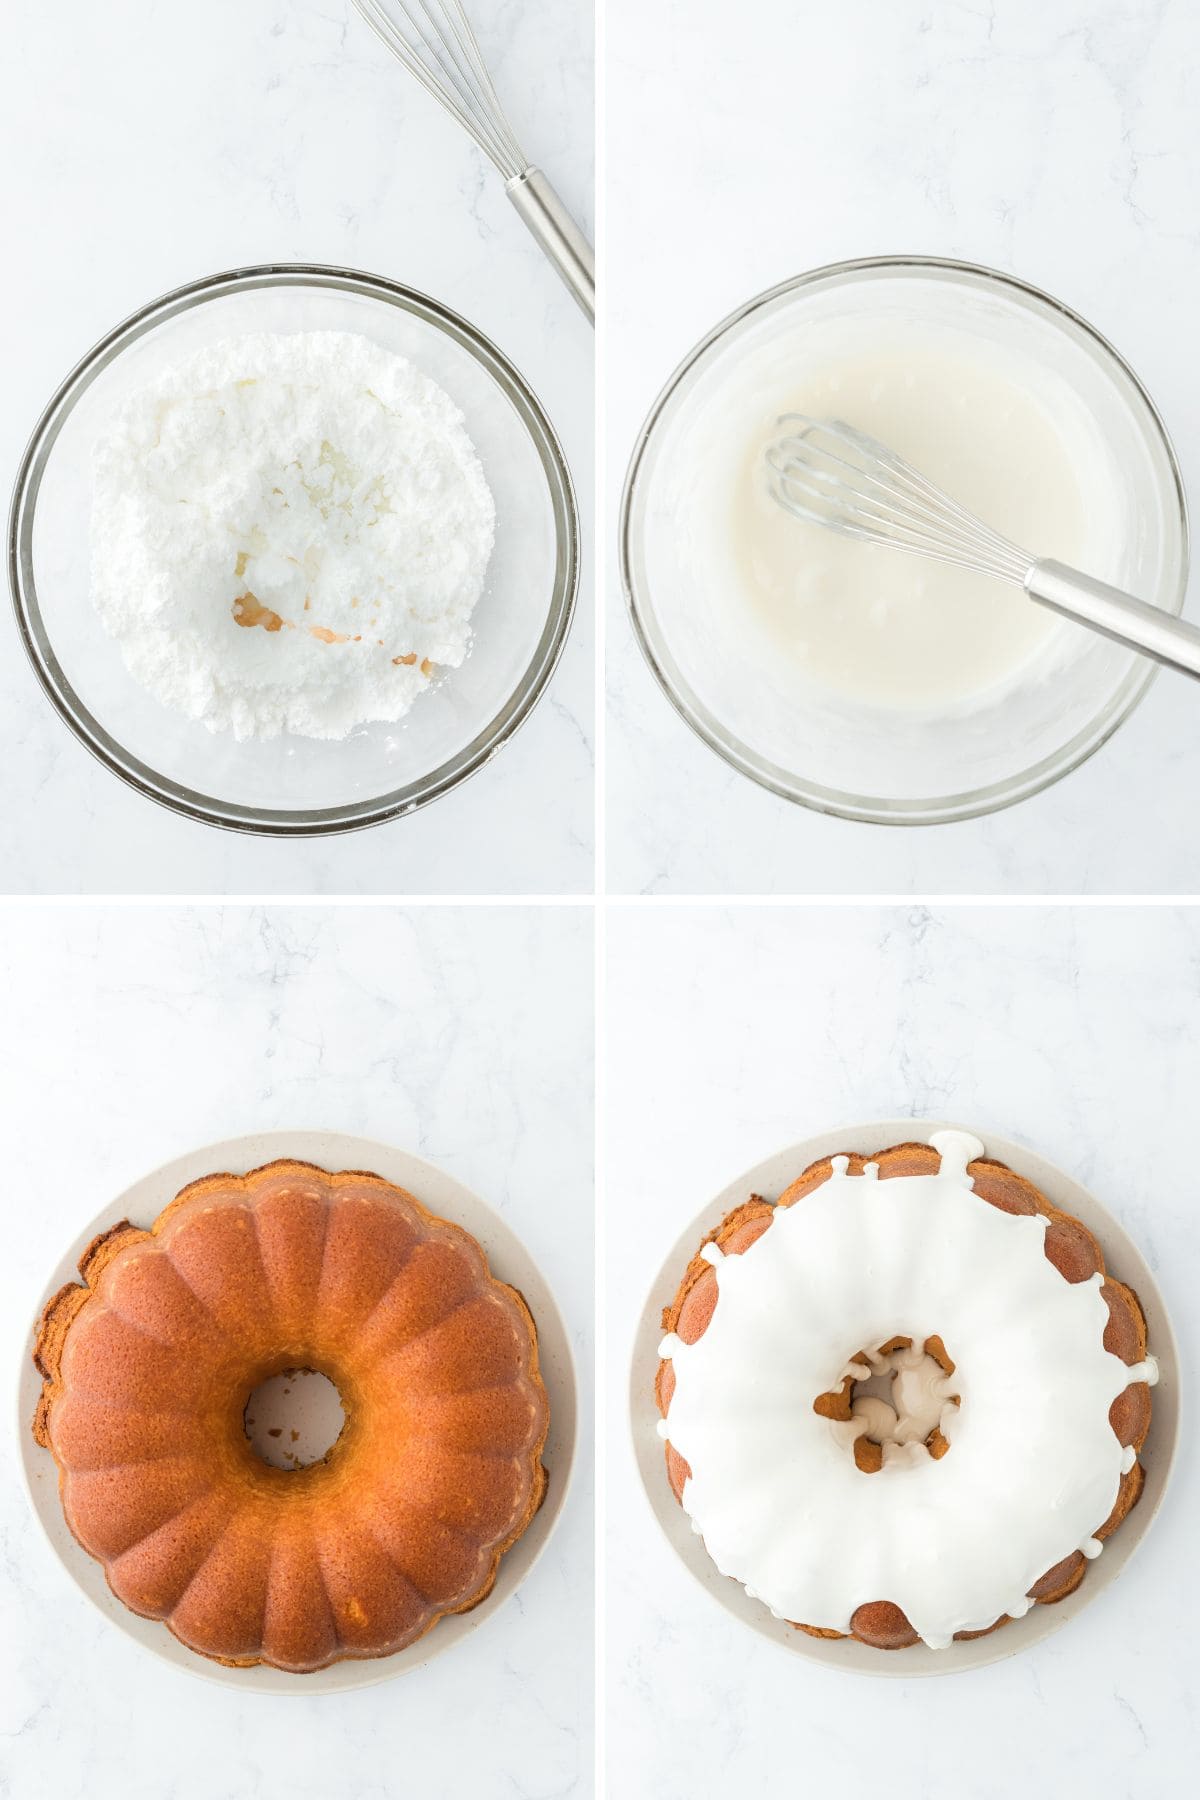 Collage of steps to make million dollar pound cake including mixing the glaze and pouring it over the cake